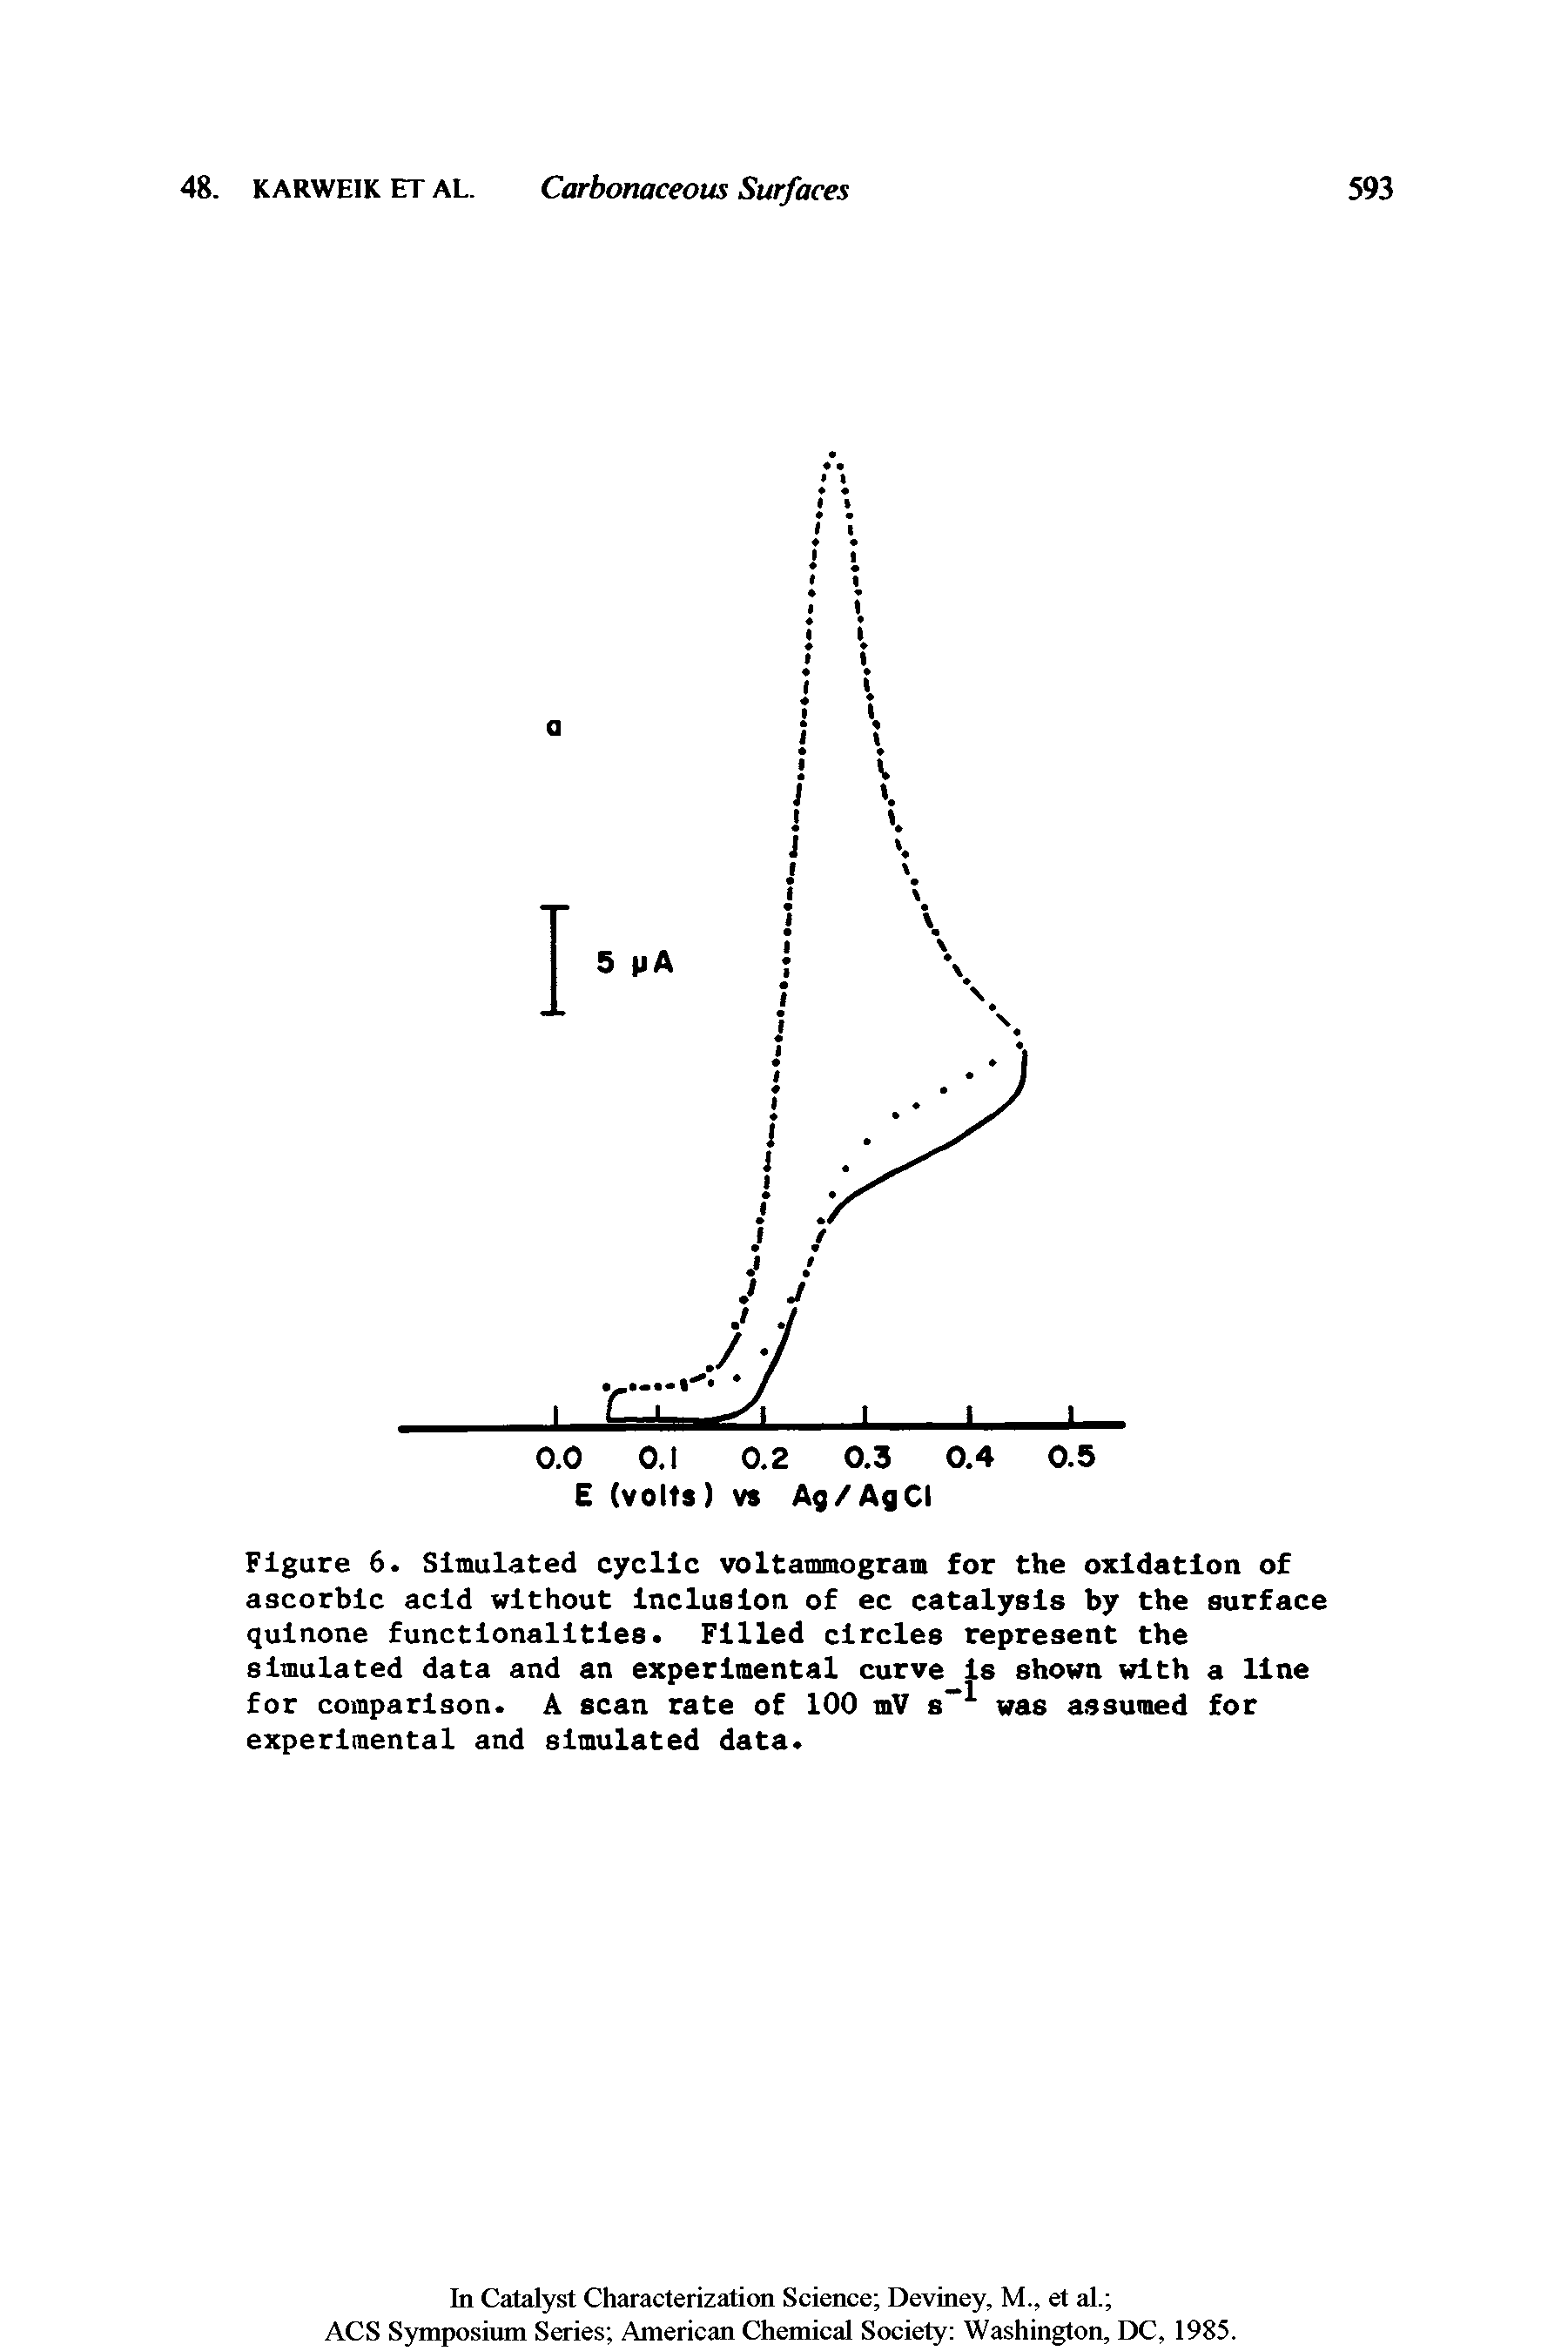 Figure 6. Simulated cyclic voltammogram for the oxidation of ascorbic acid without Inclusion of ec catalysis by the surface qulnone functionalities. Filled circles represent the simulated data and an experimental curve Is shown with a line for comparison. A scan rate of 100 mV s was assumed for experimental and simulated data.